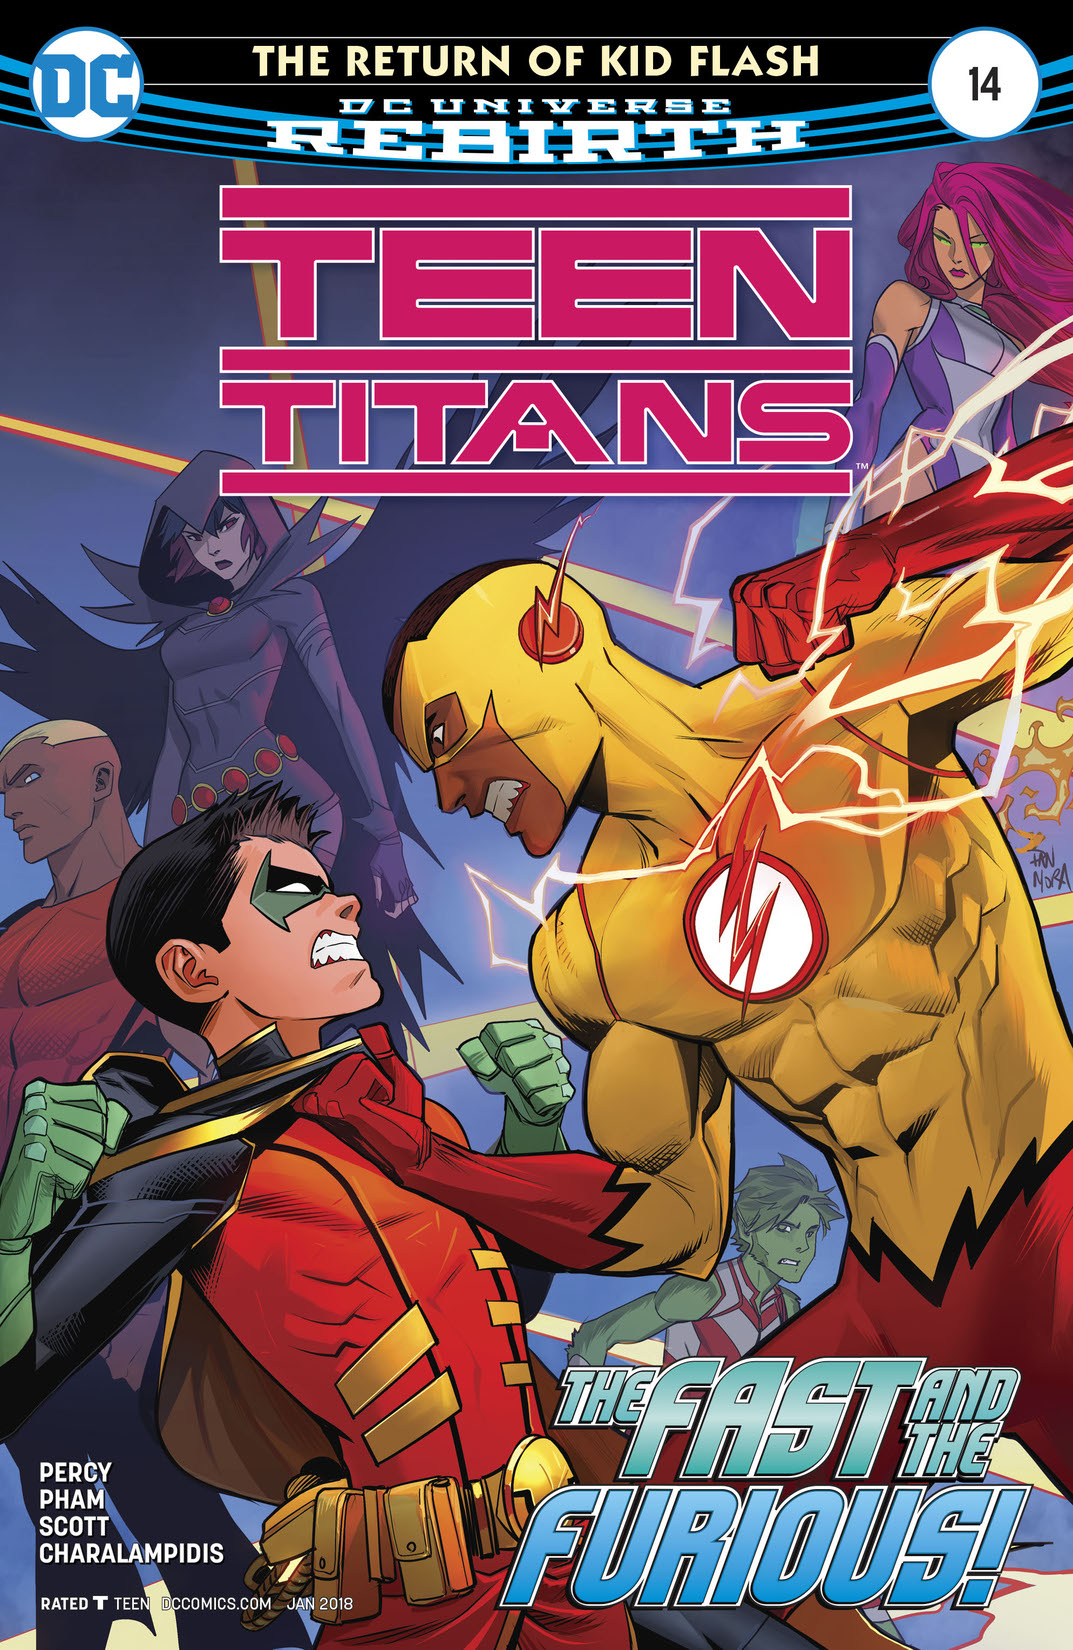 Teen Titans (2016-) #14 preview images